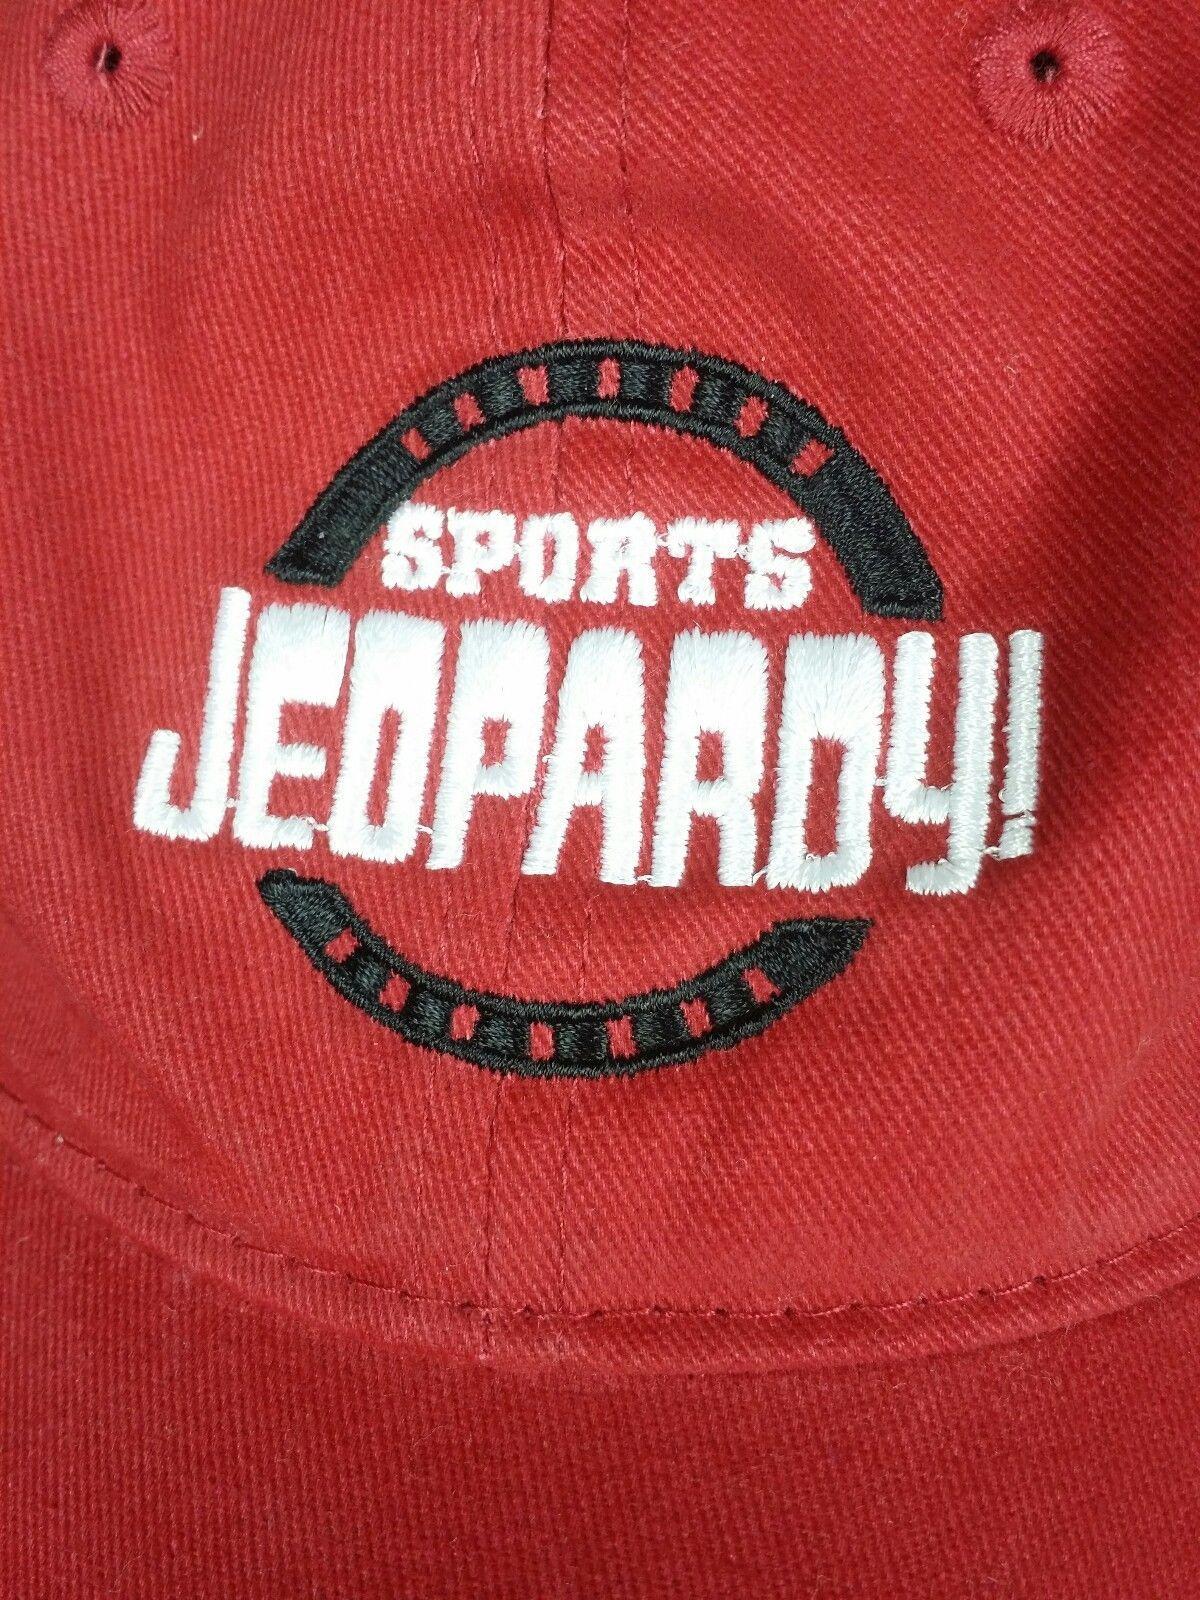 Jeopardy Game Show Logo - Sports Jeopardy Game One Show NBC Adjustable Adult One Game Size Hat